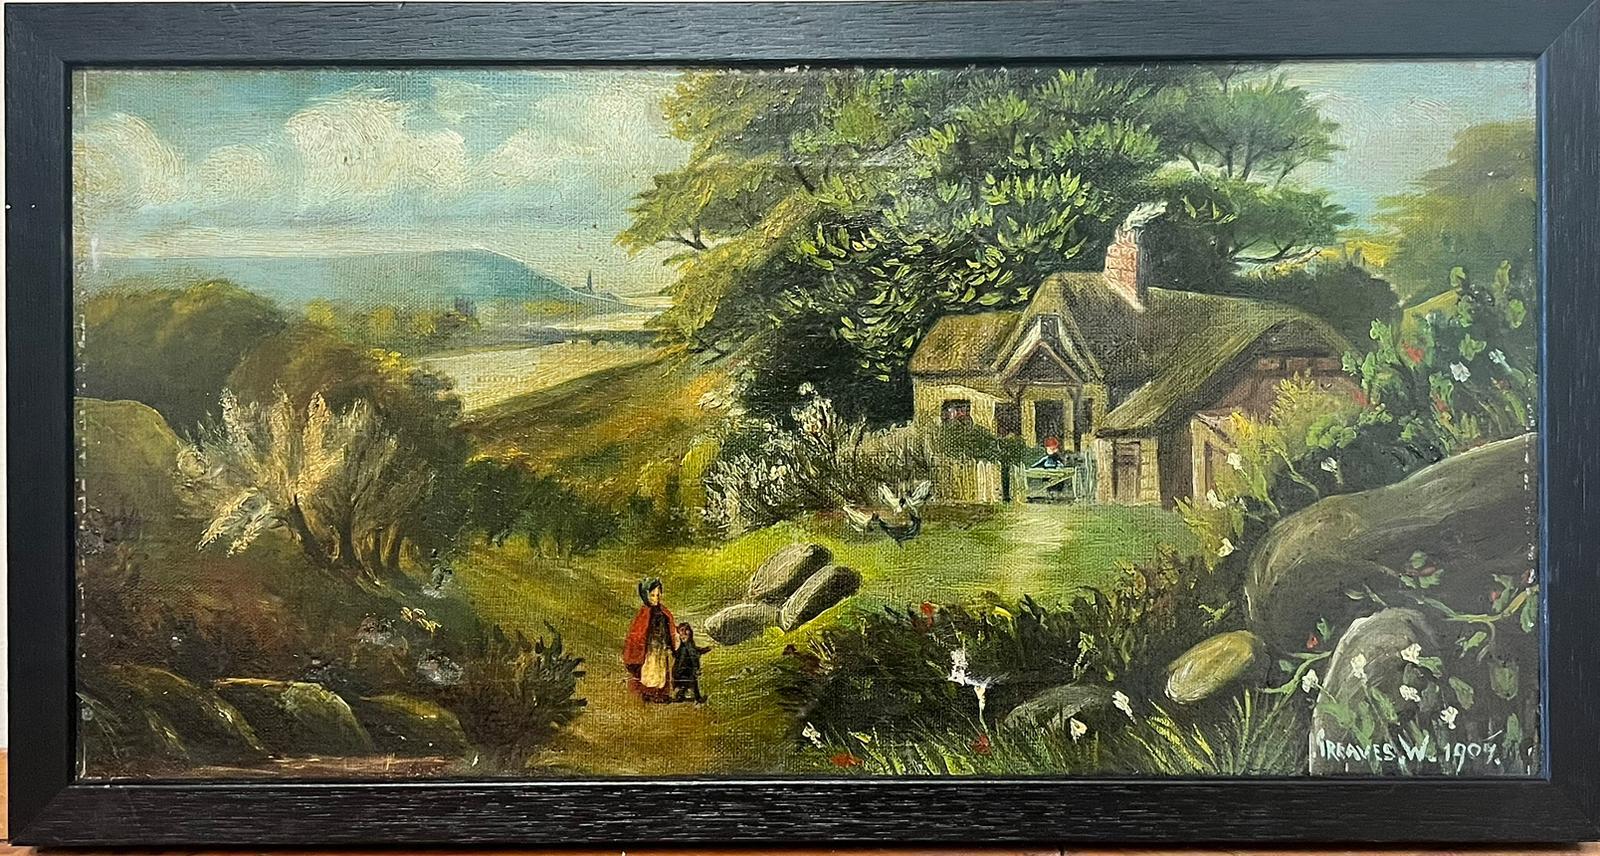 Landscape with figures in a cottage
signed by W.Greaves
oil on canvas, framed
dated 1909
framed: 10 x 19 inches
canvas: 9 x 18 inches
provenance: private collection, UK
condition: very good and sound condition
